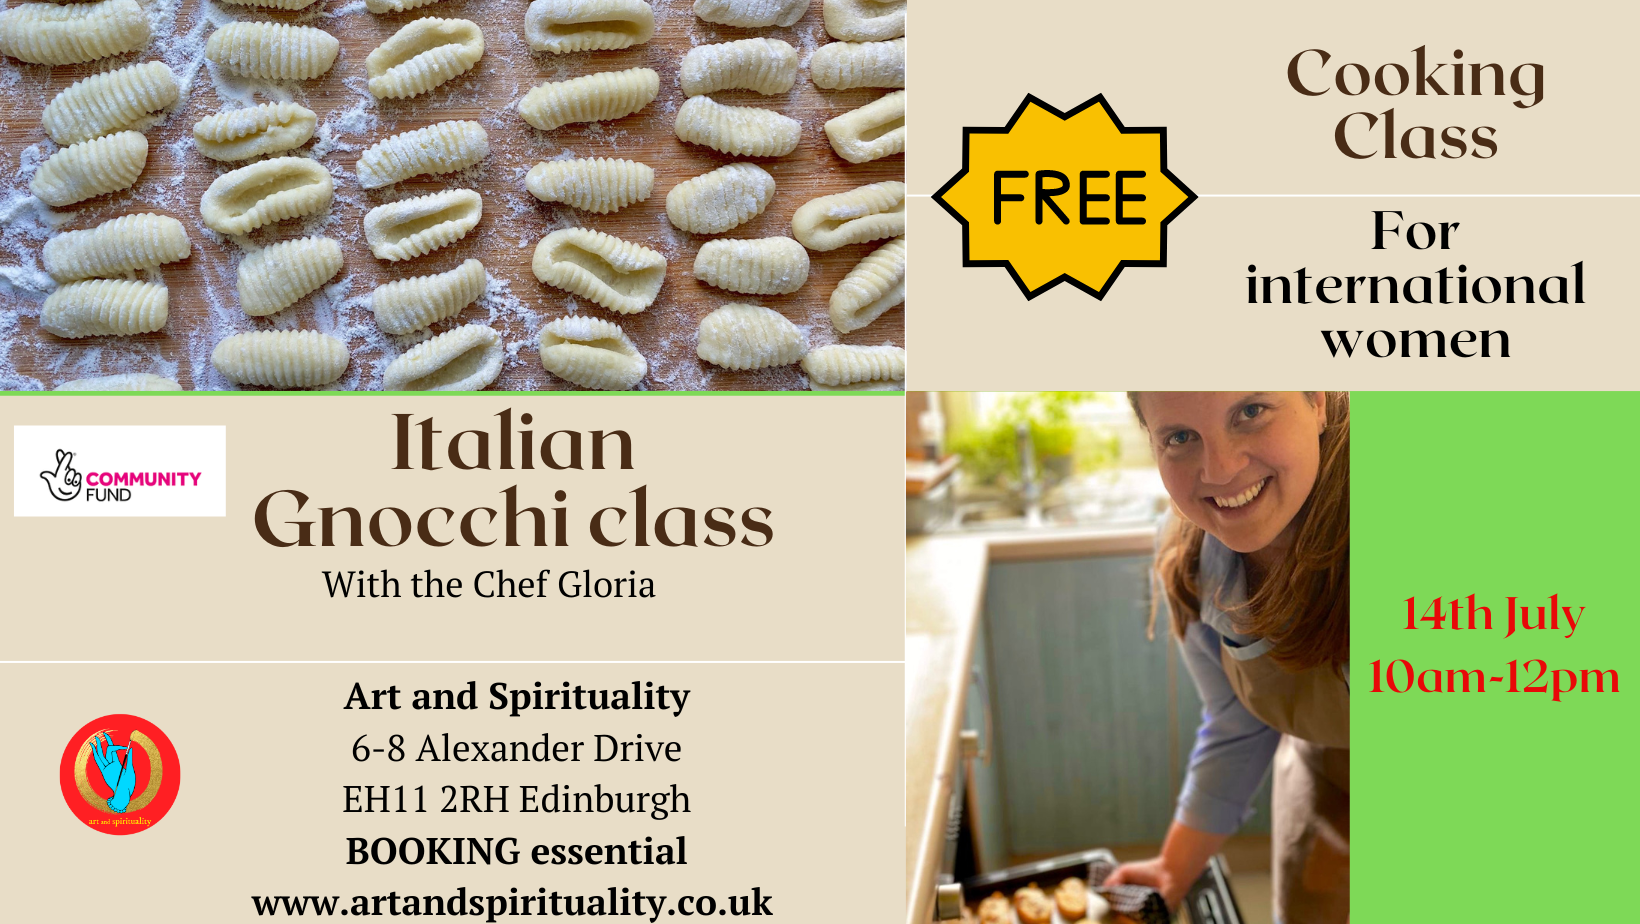 14th July morning FREE COOKING CLASS: ITALIAN GNOCCHI for international women